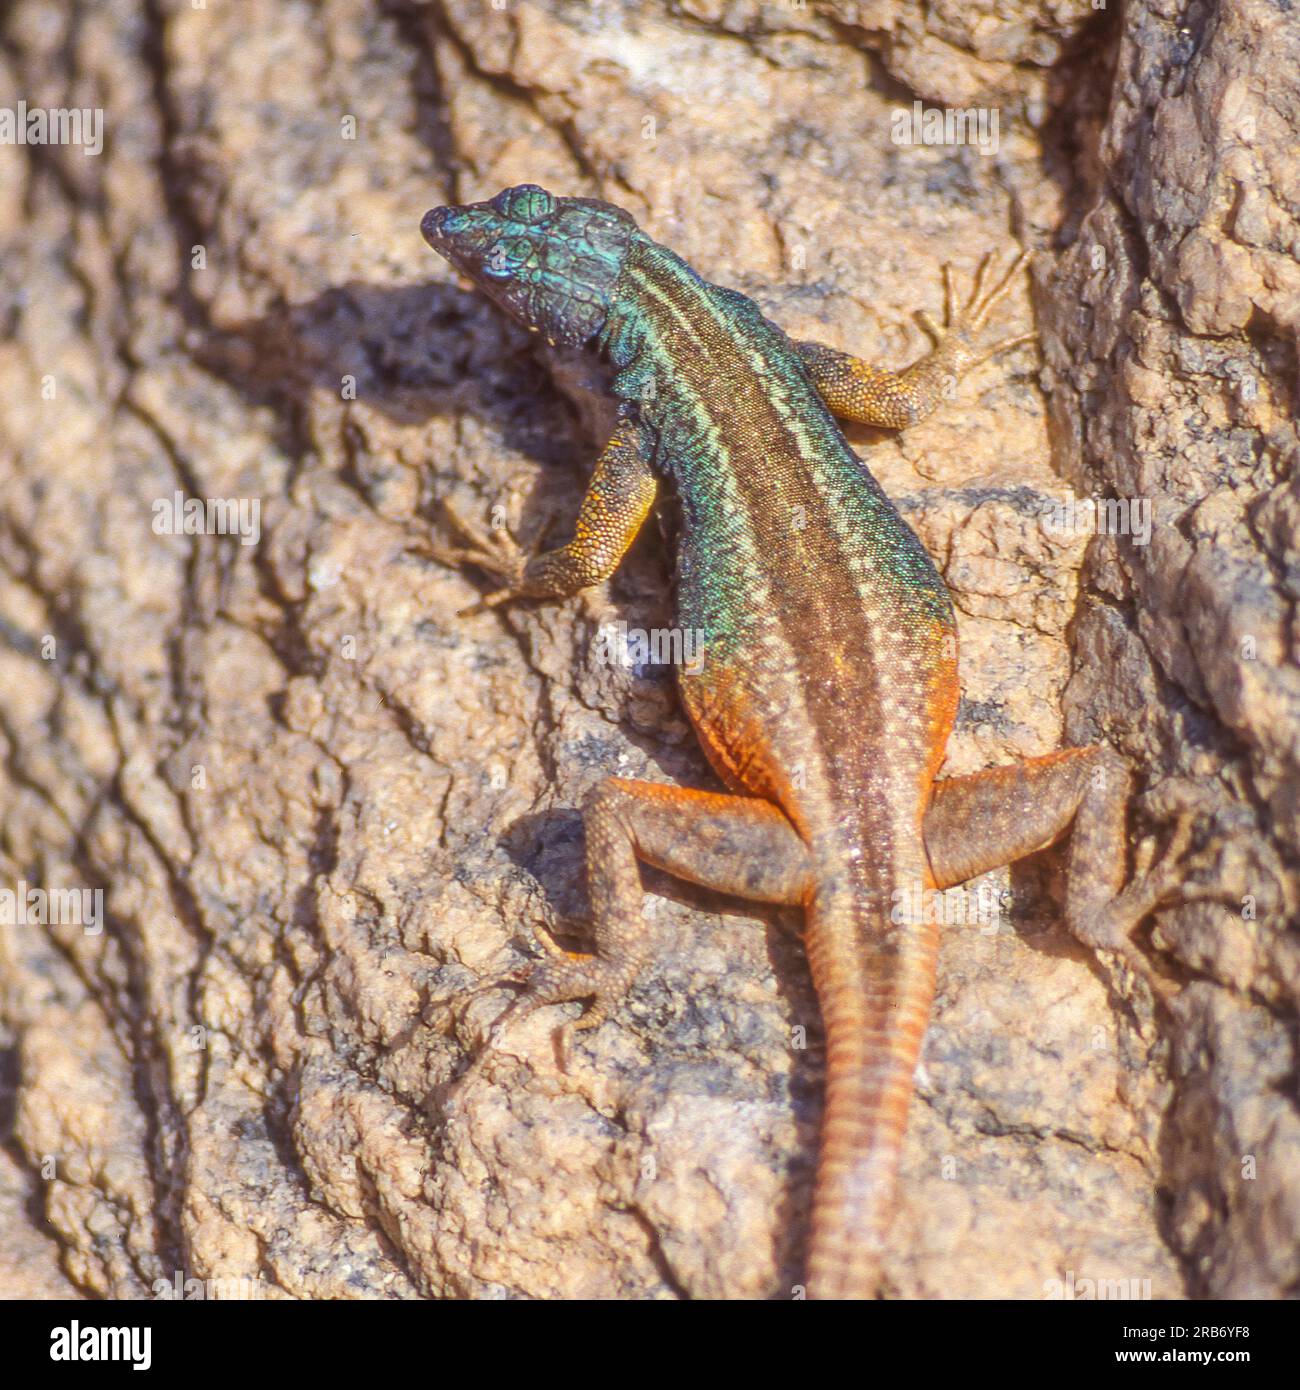 A Broadley’s flat lizard, locally known as the Augrabies flat lizard, sunning itself on a rock at Augrabies Falls National Park in South Africa. Stock Photo